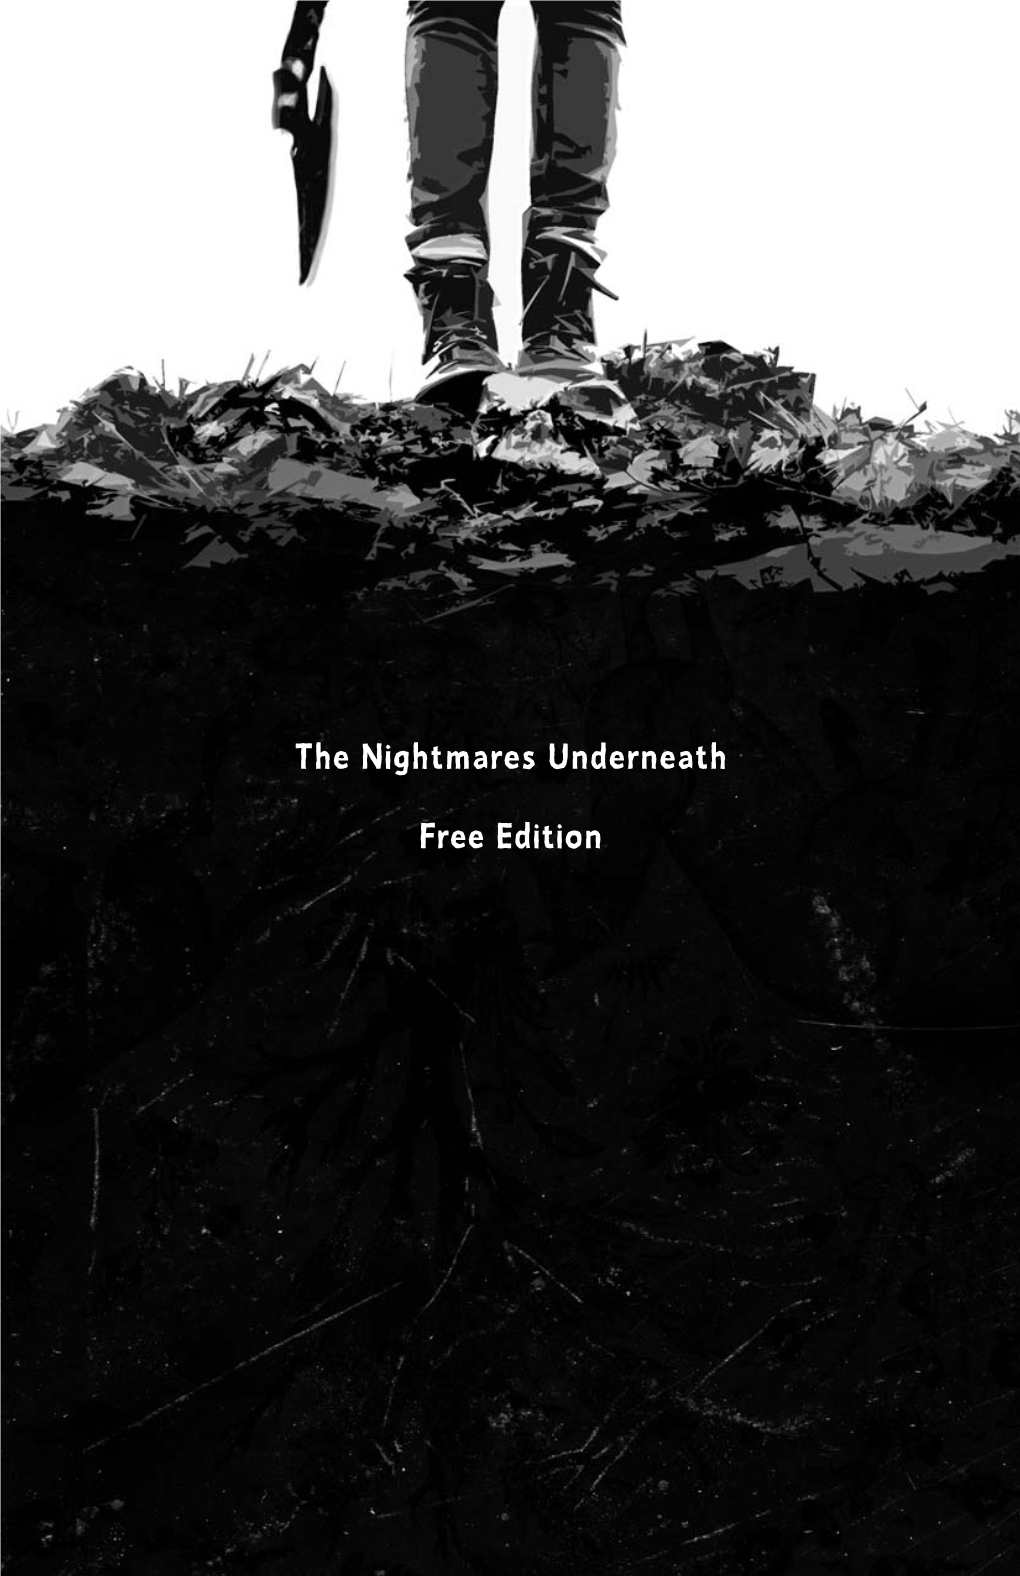 The Nightmares Underneath Free Edition